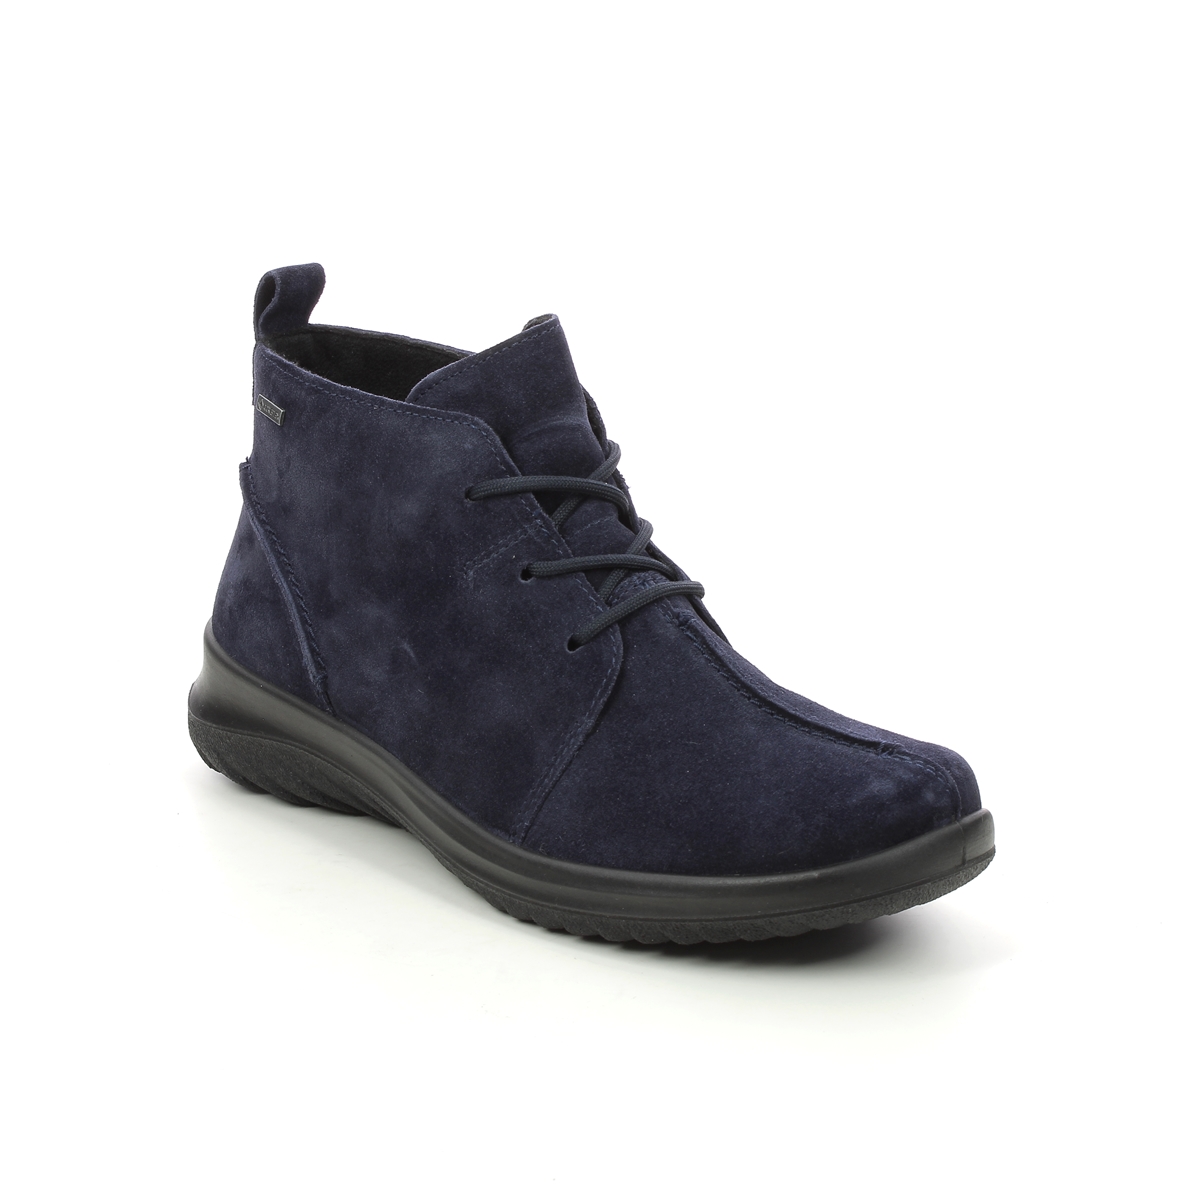 Legero Soft Lace Gtx Navy Suede Womens Lace Up Boots 2009569-8300 In Size 5.5 In Plain Navy Suede